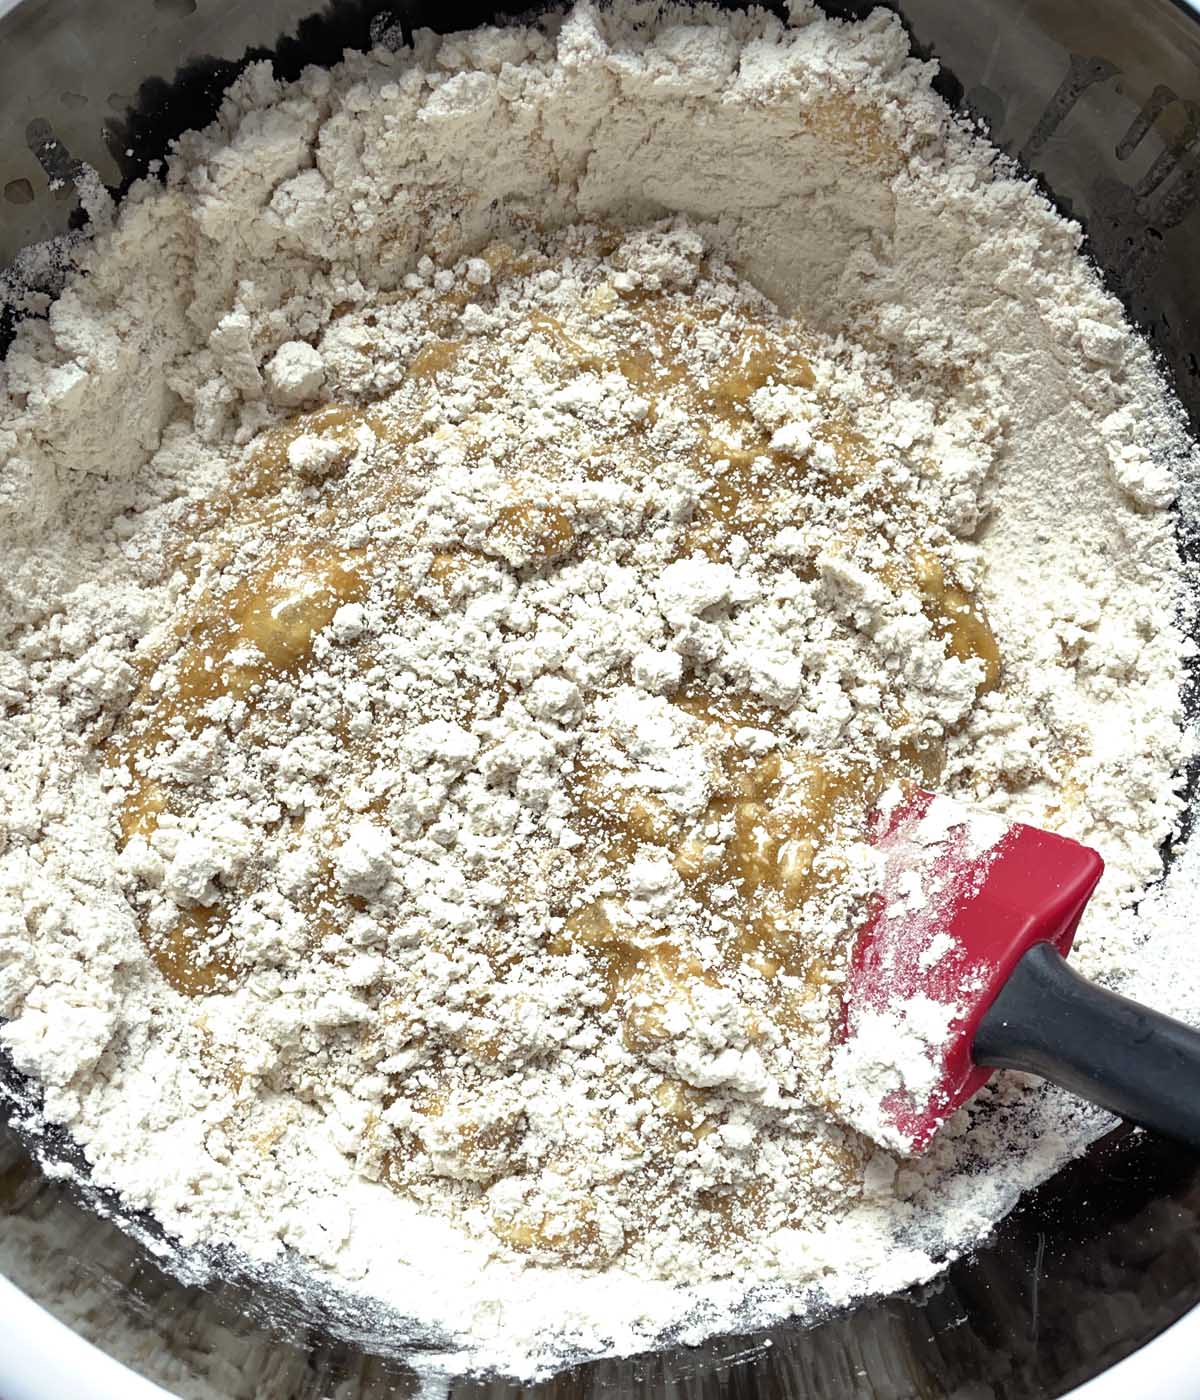 A red rubber spatula mixing white flour and brown liquid in a bowl.